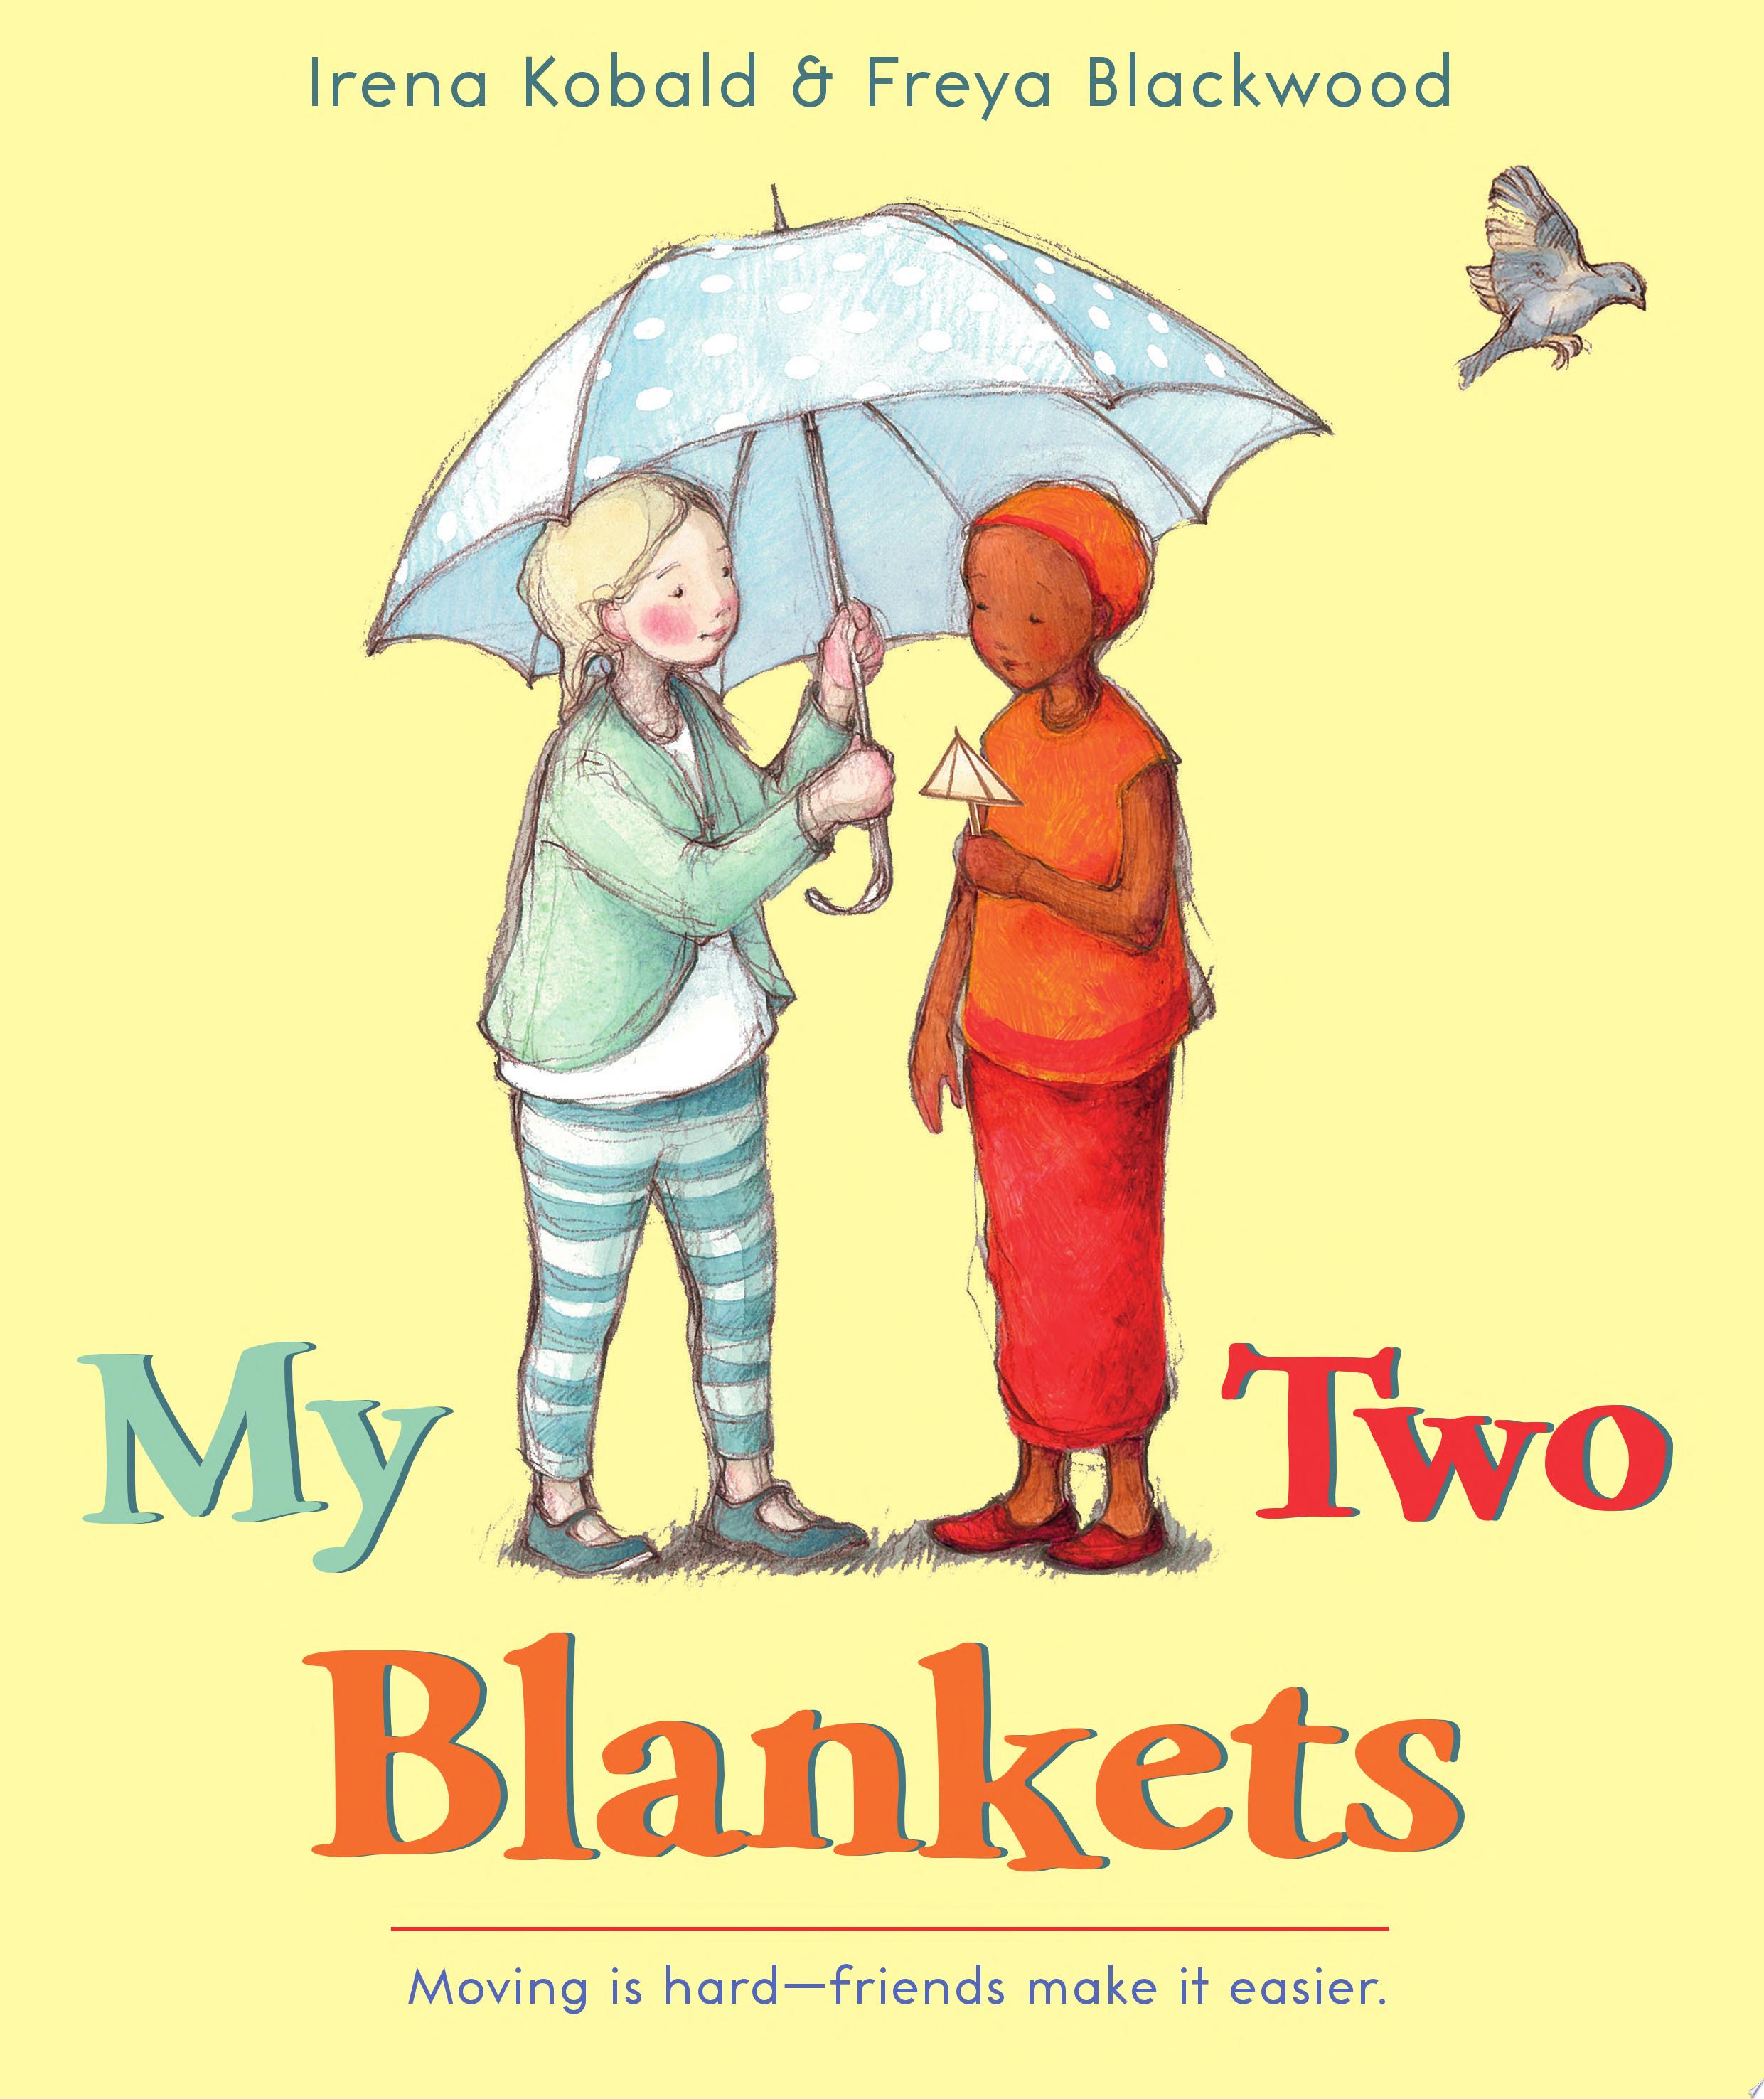 Image for "My Two Blankets"